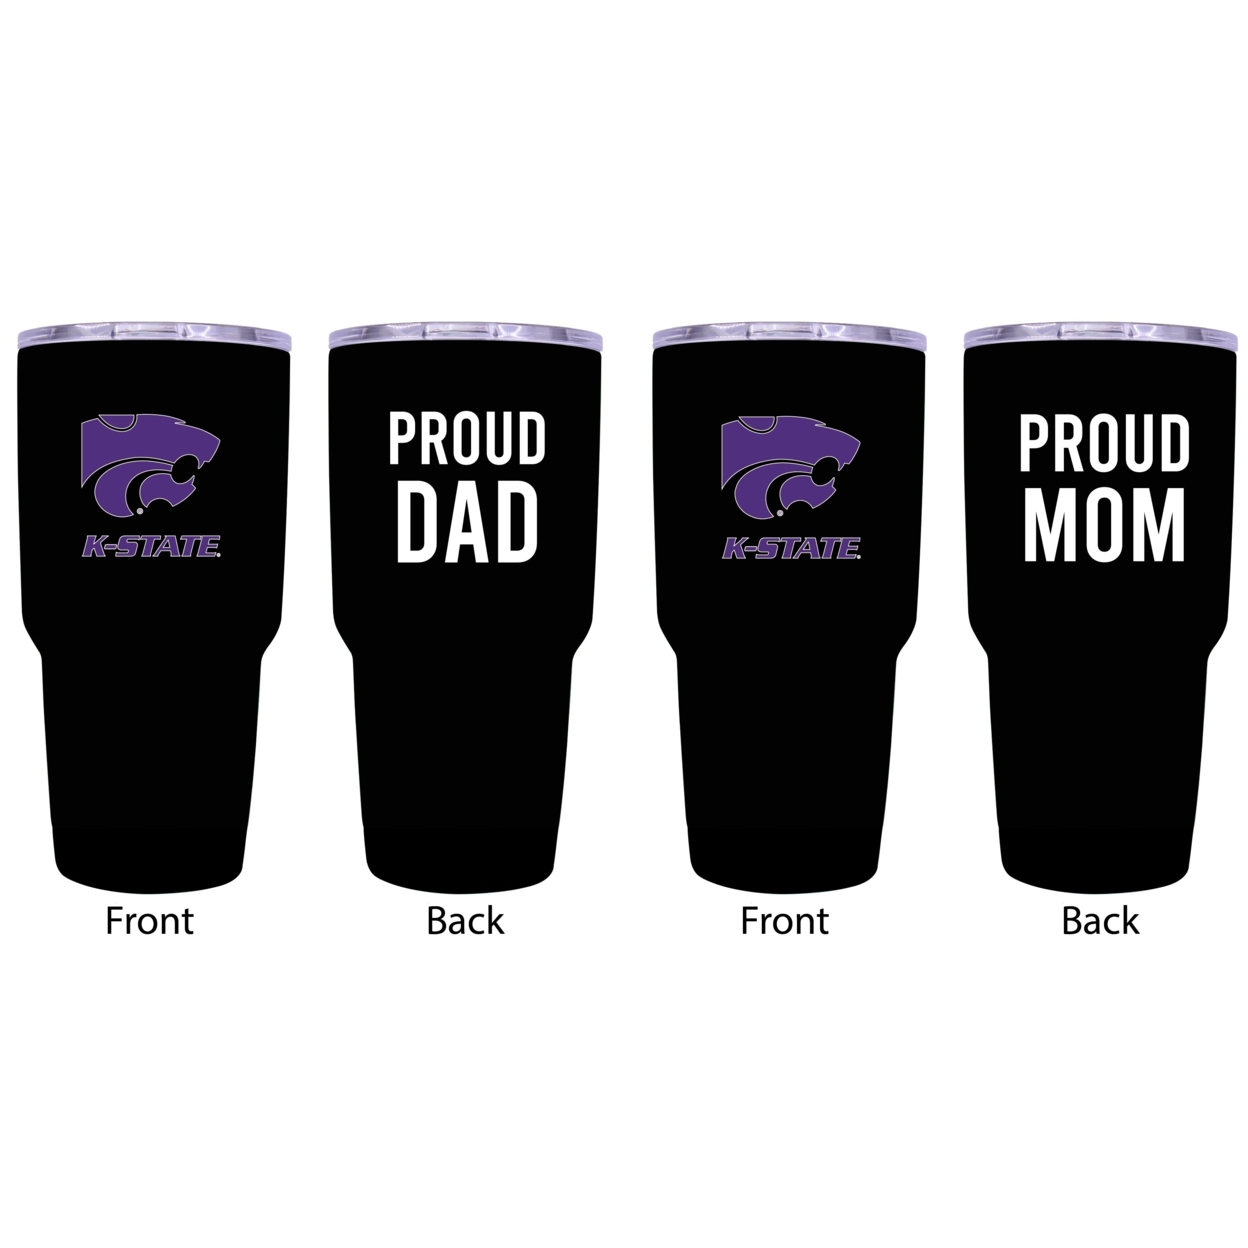 Kansas State Wildcats Proud Mom And Dad 24 Oz Insulated Stainless Steel Tumblers 2 Pack Black.